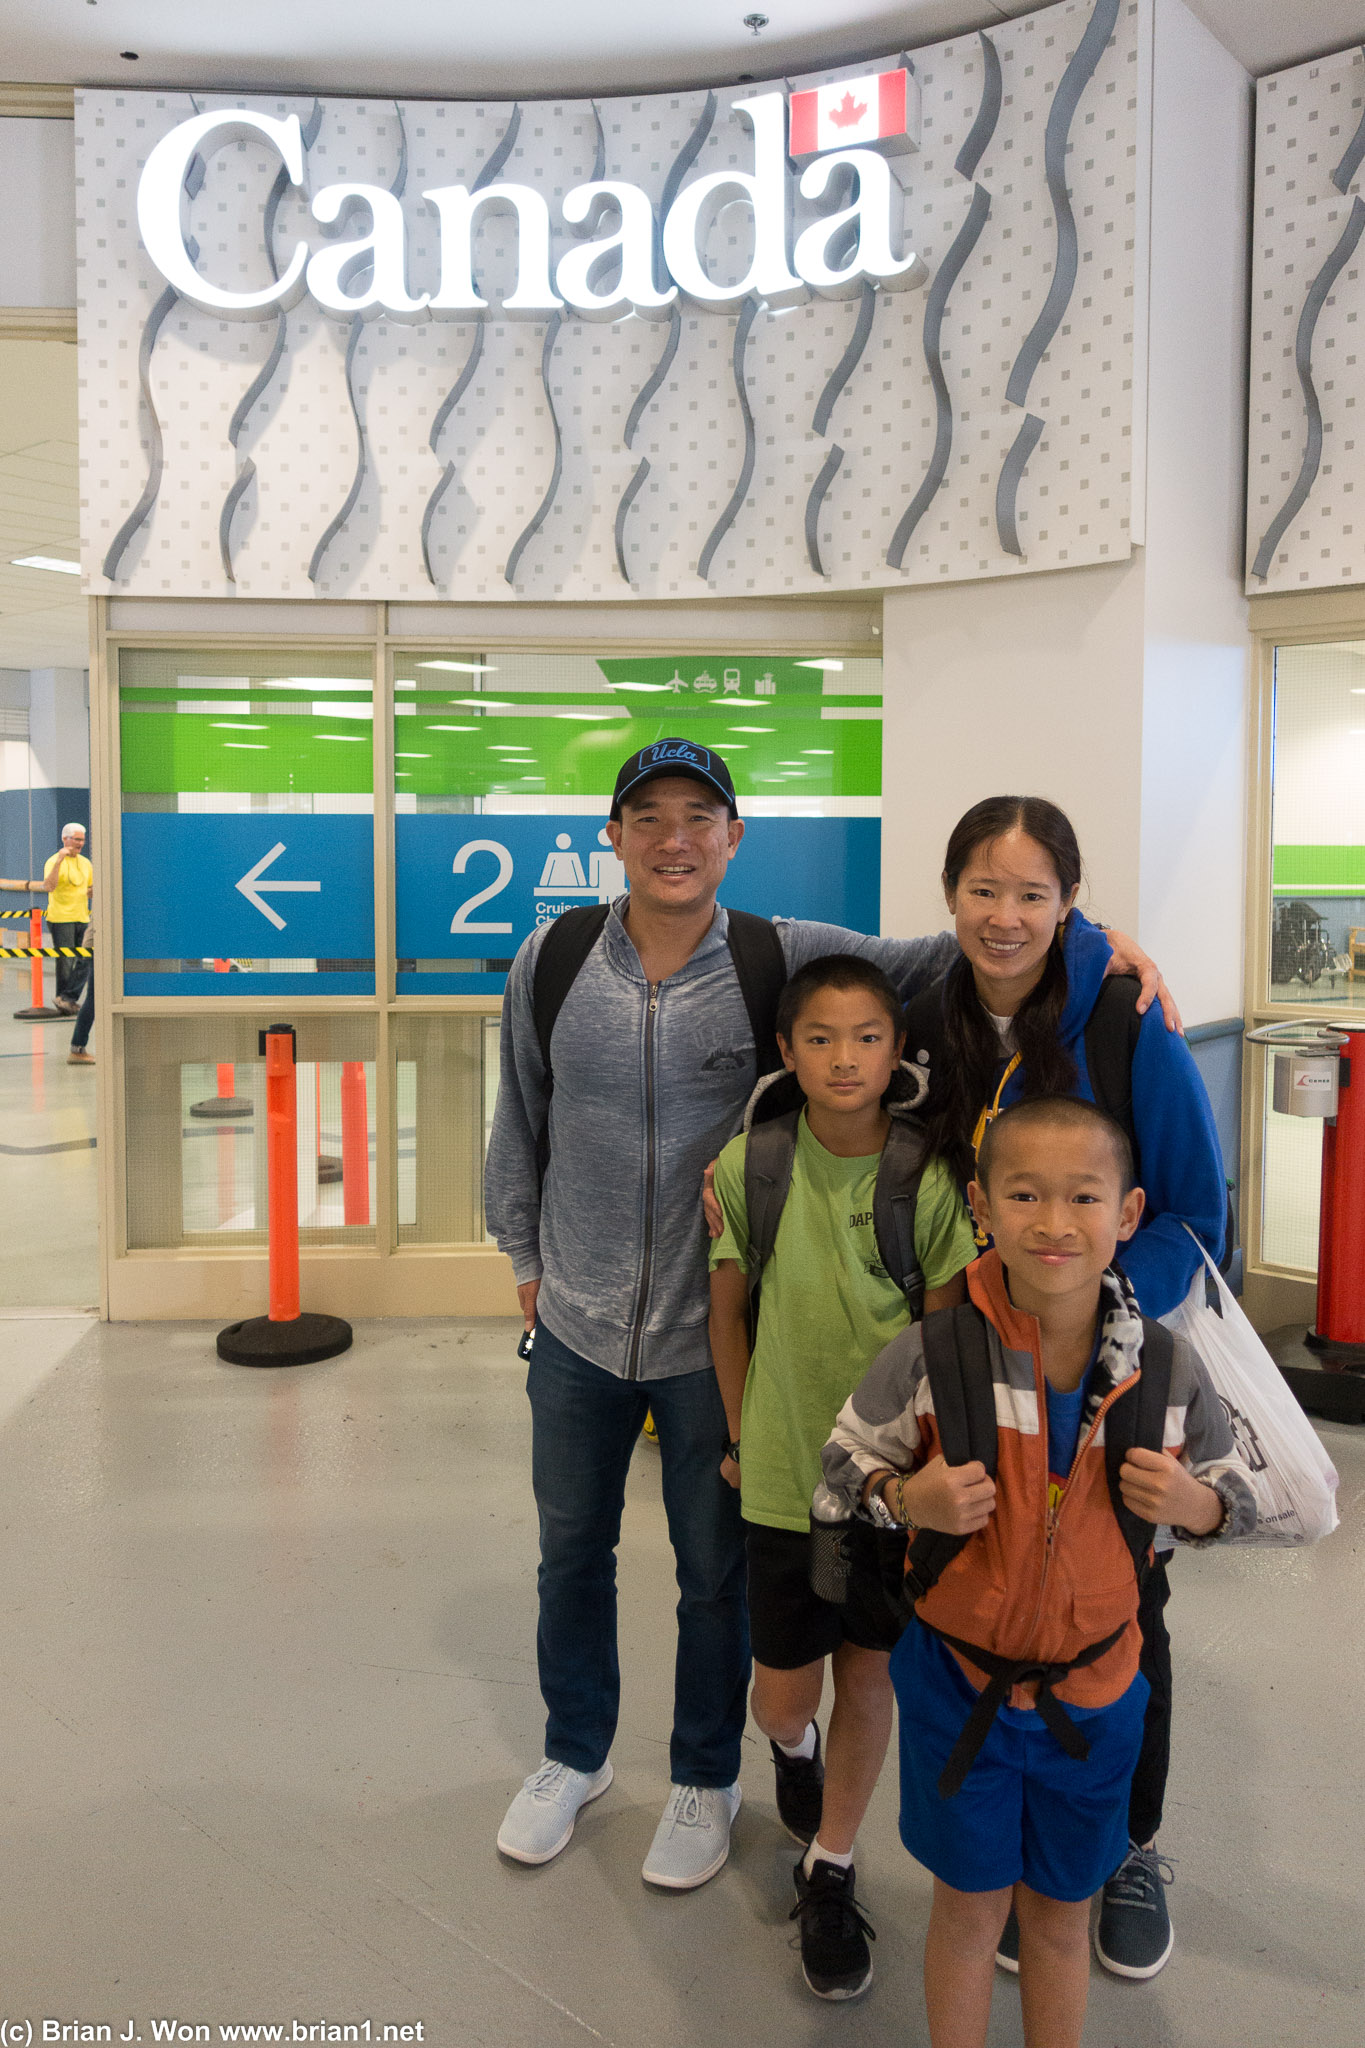 The Lee family, about to depart.